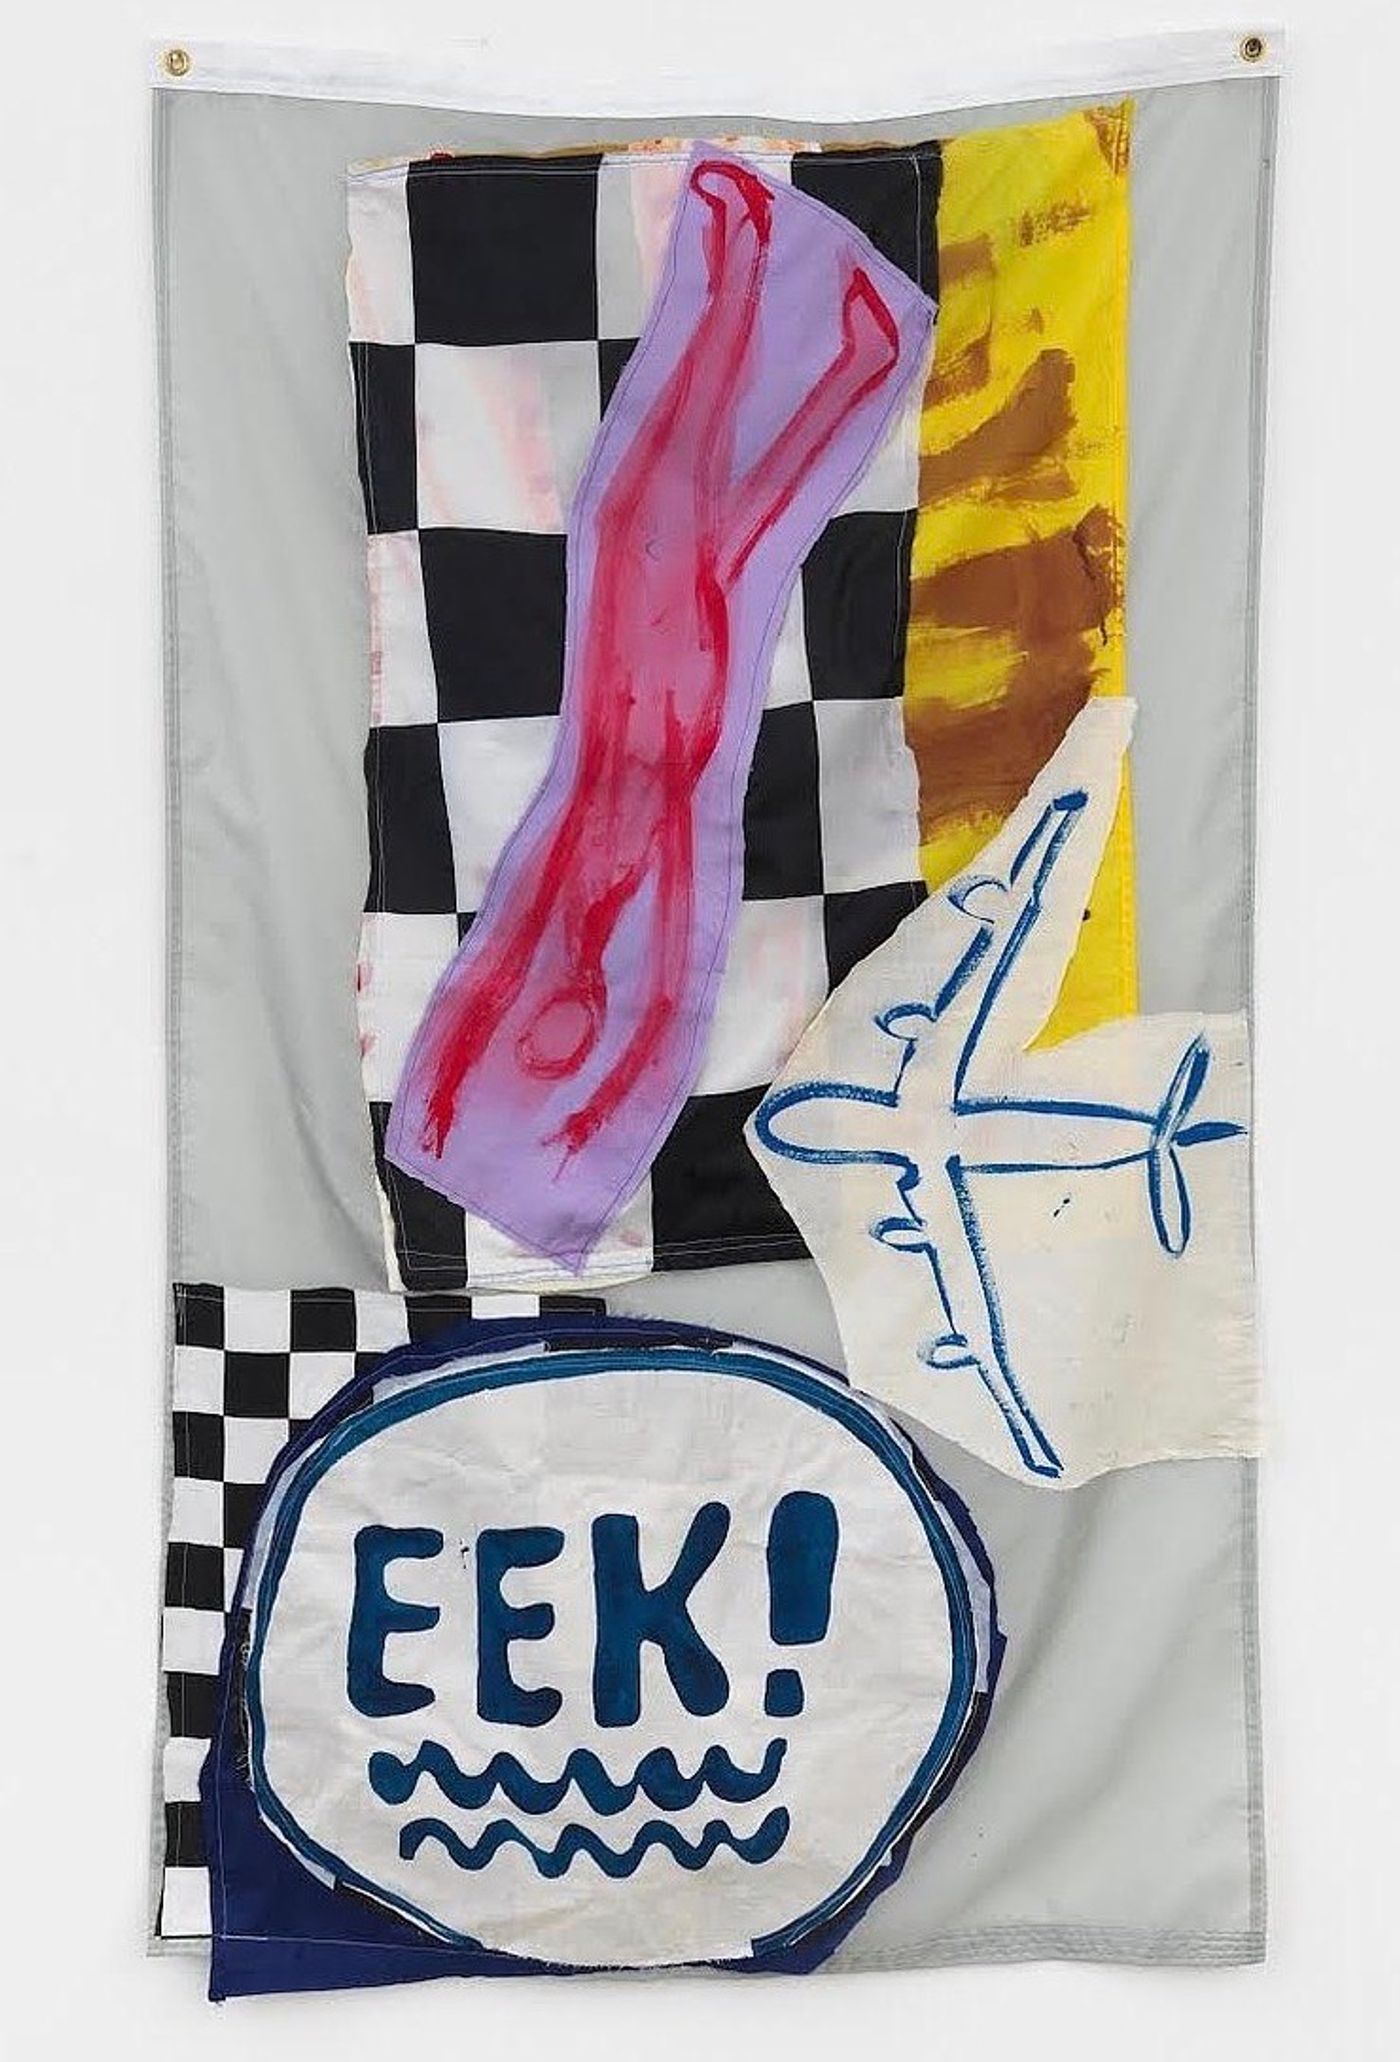 Image of Untitled (EEK!), 2020: Fabric and paint on flag